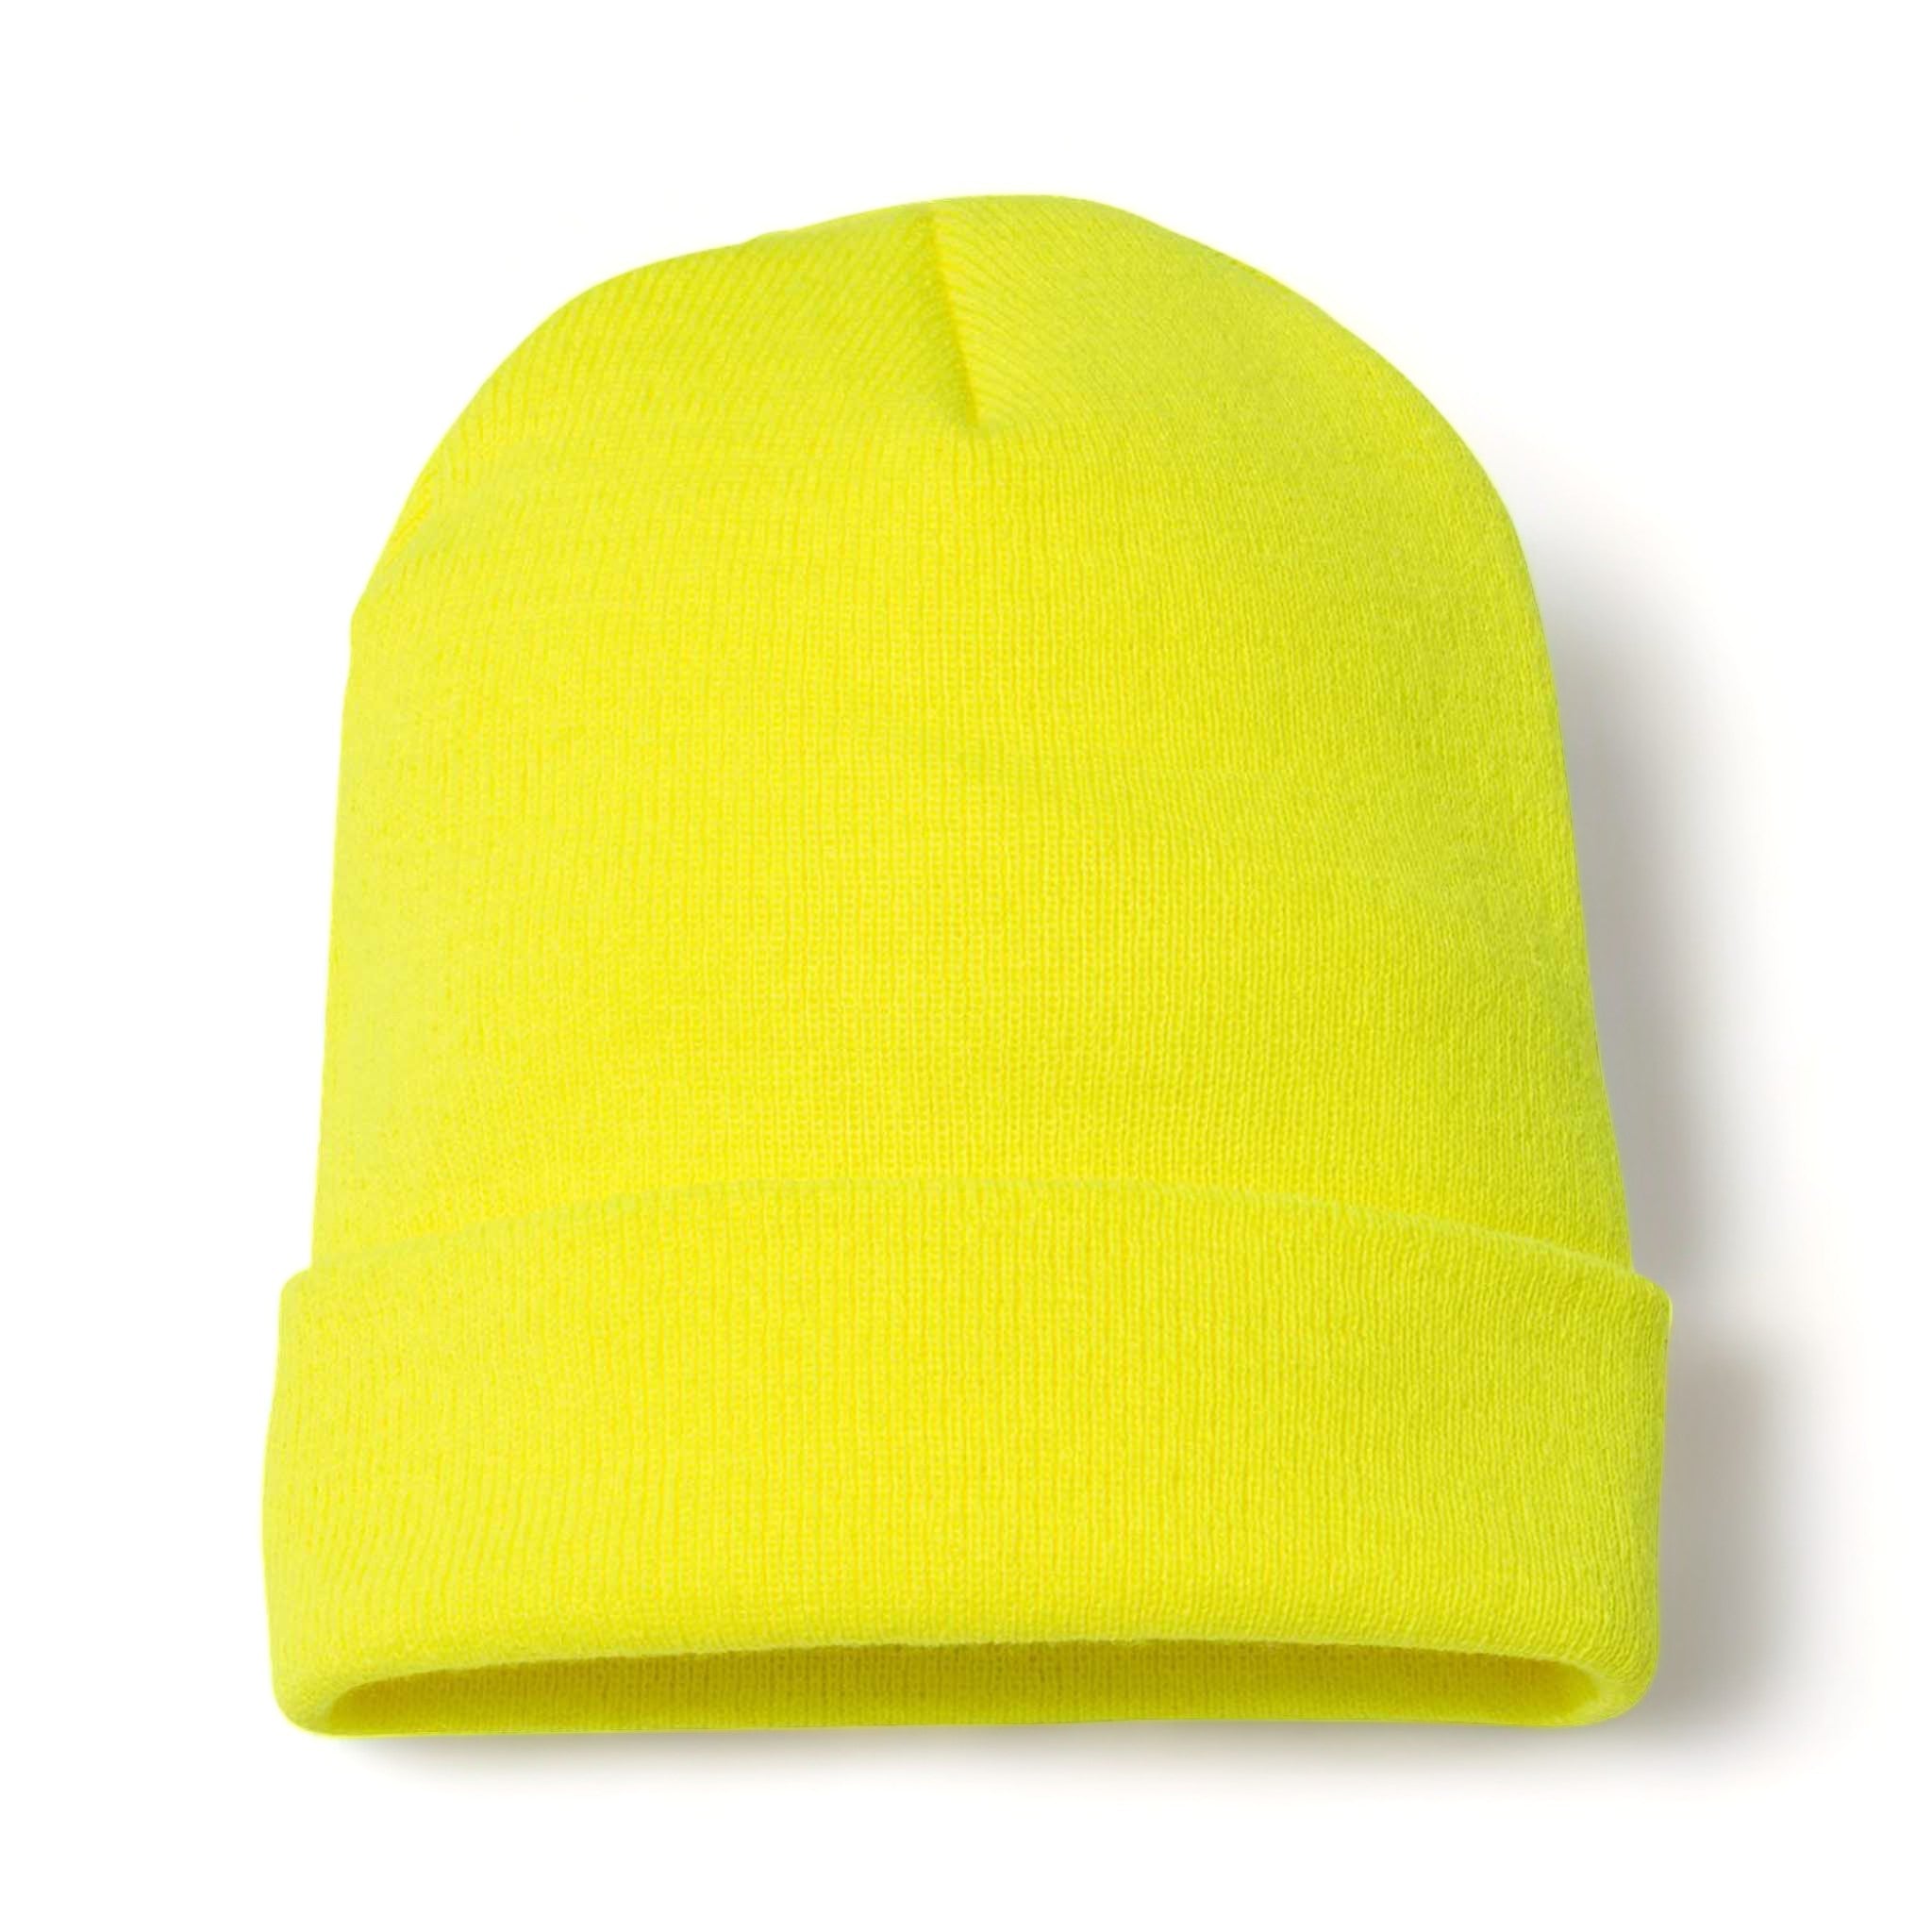 YP Classics 1501KC custom beanie in safety yellow